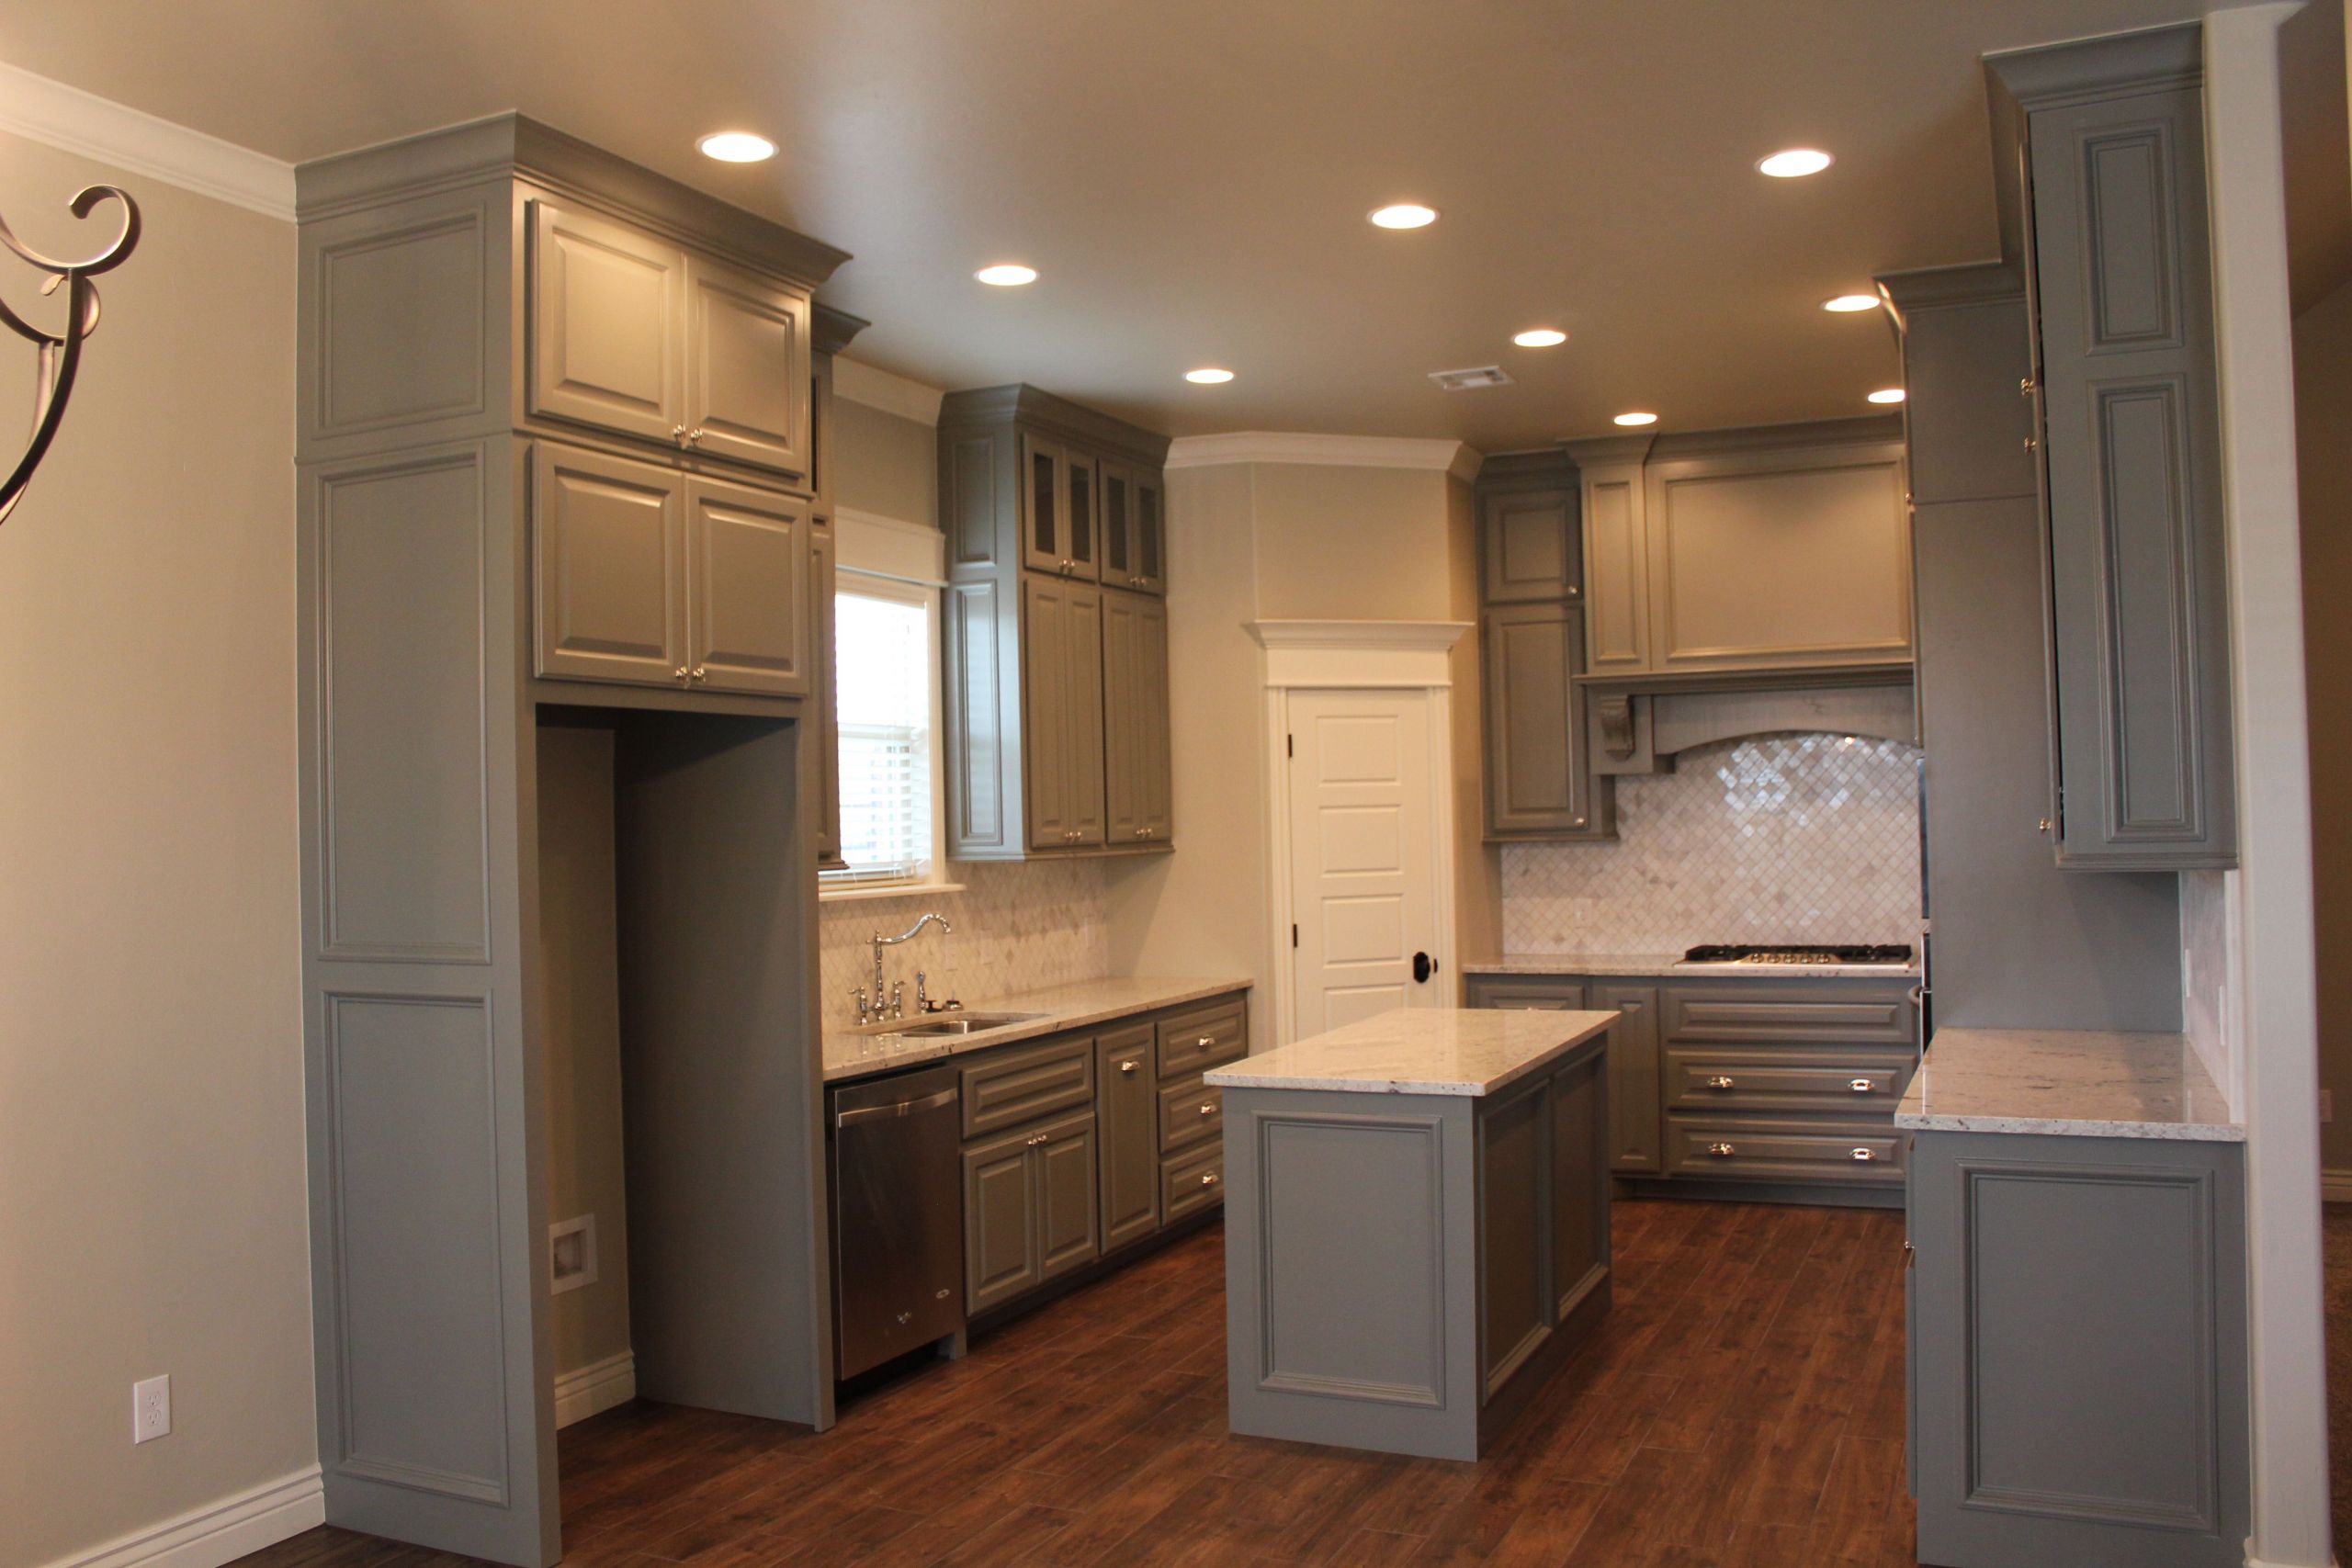 Tan Kitchen Walls
 Bm Chelsea Gray Cabinets Sw Accessible Beige Walls White